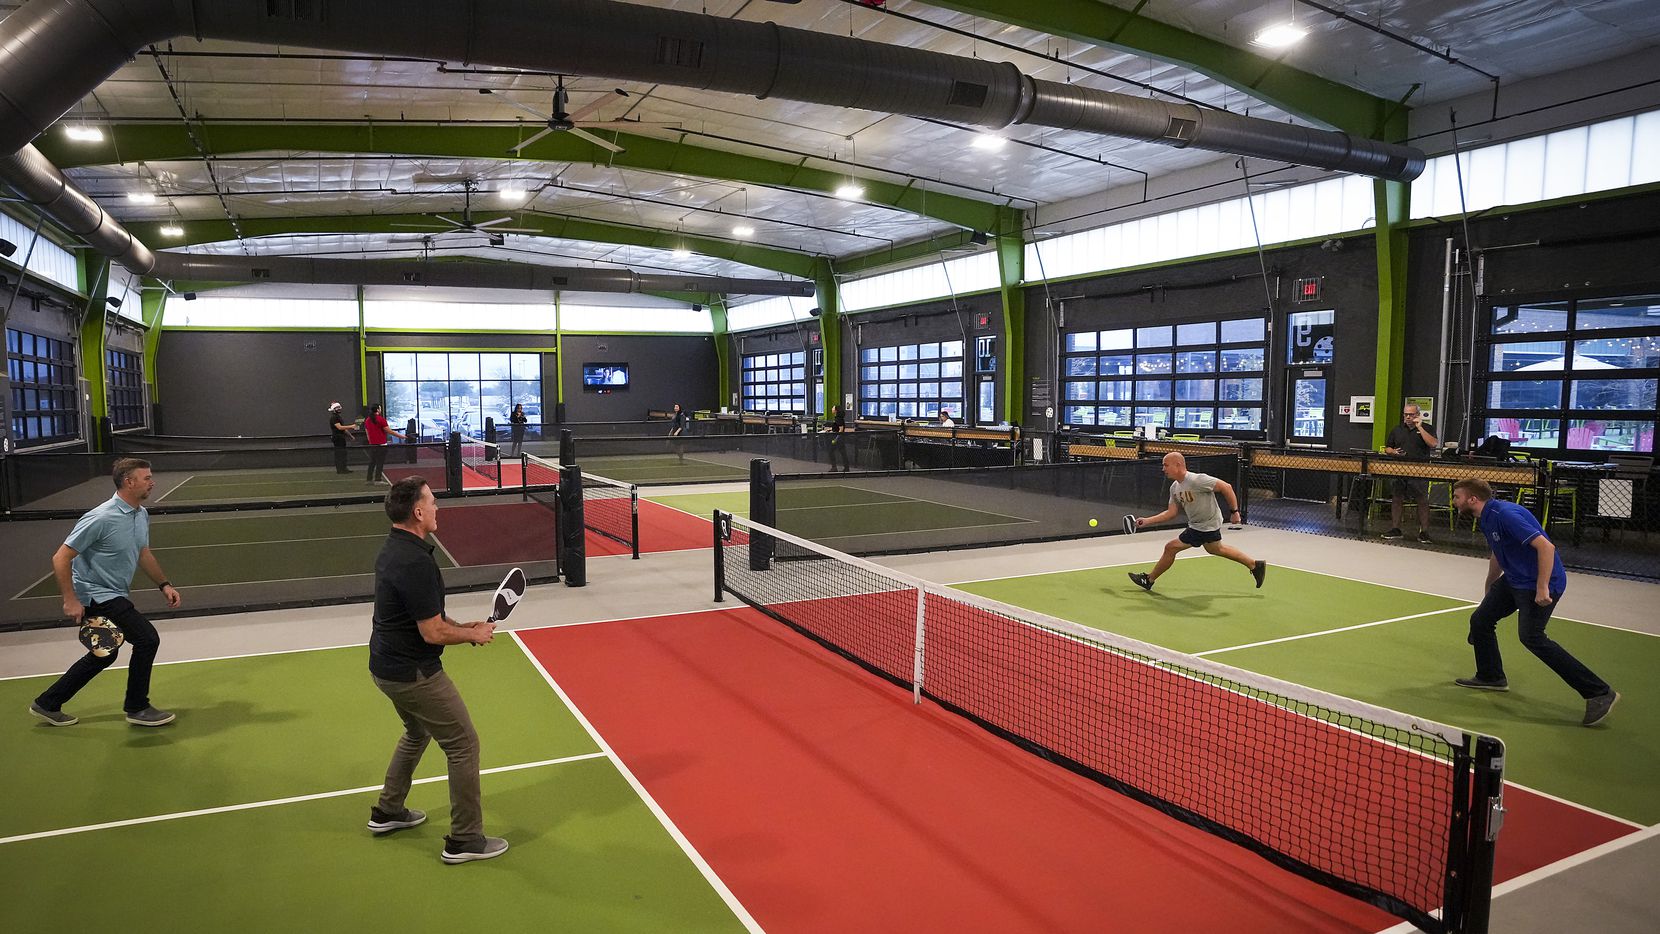 D FW s fastest growing pickleball bar biz expands to 2 North Texas burbs